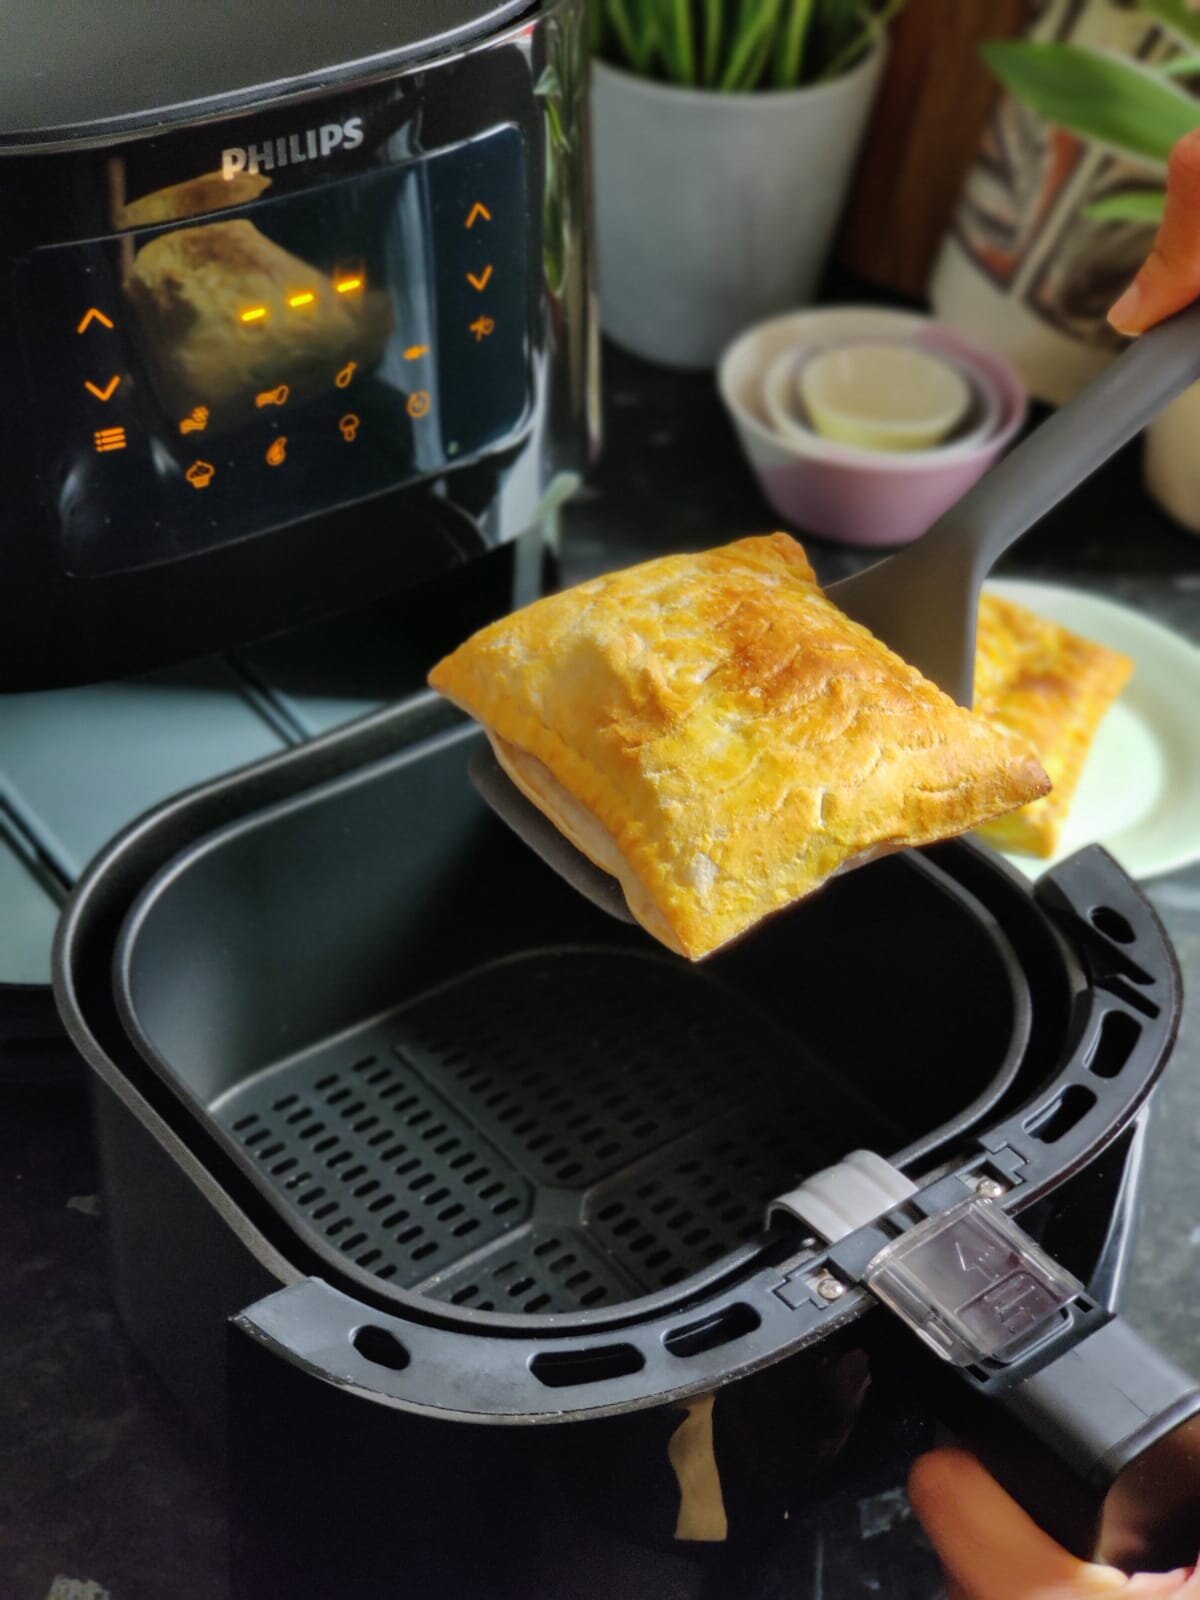 Philips Essential Airfryer — Her Favourite Food Travel